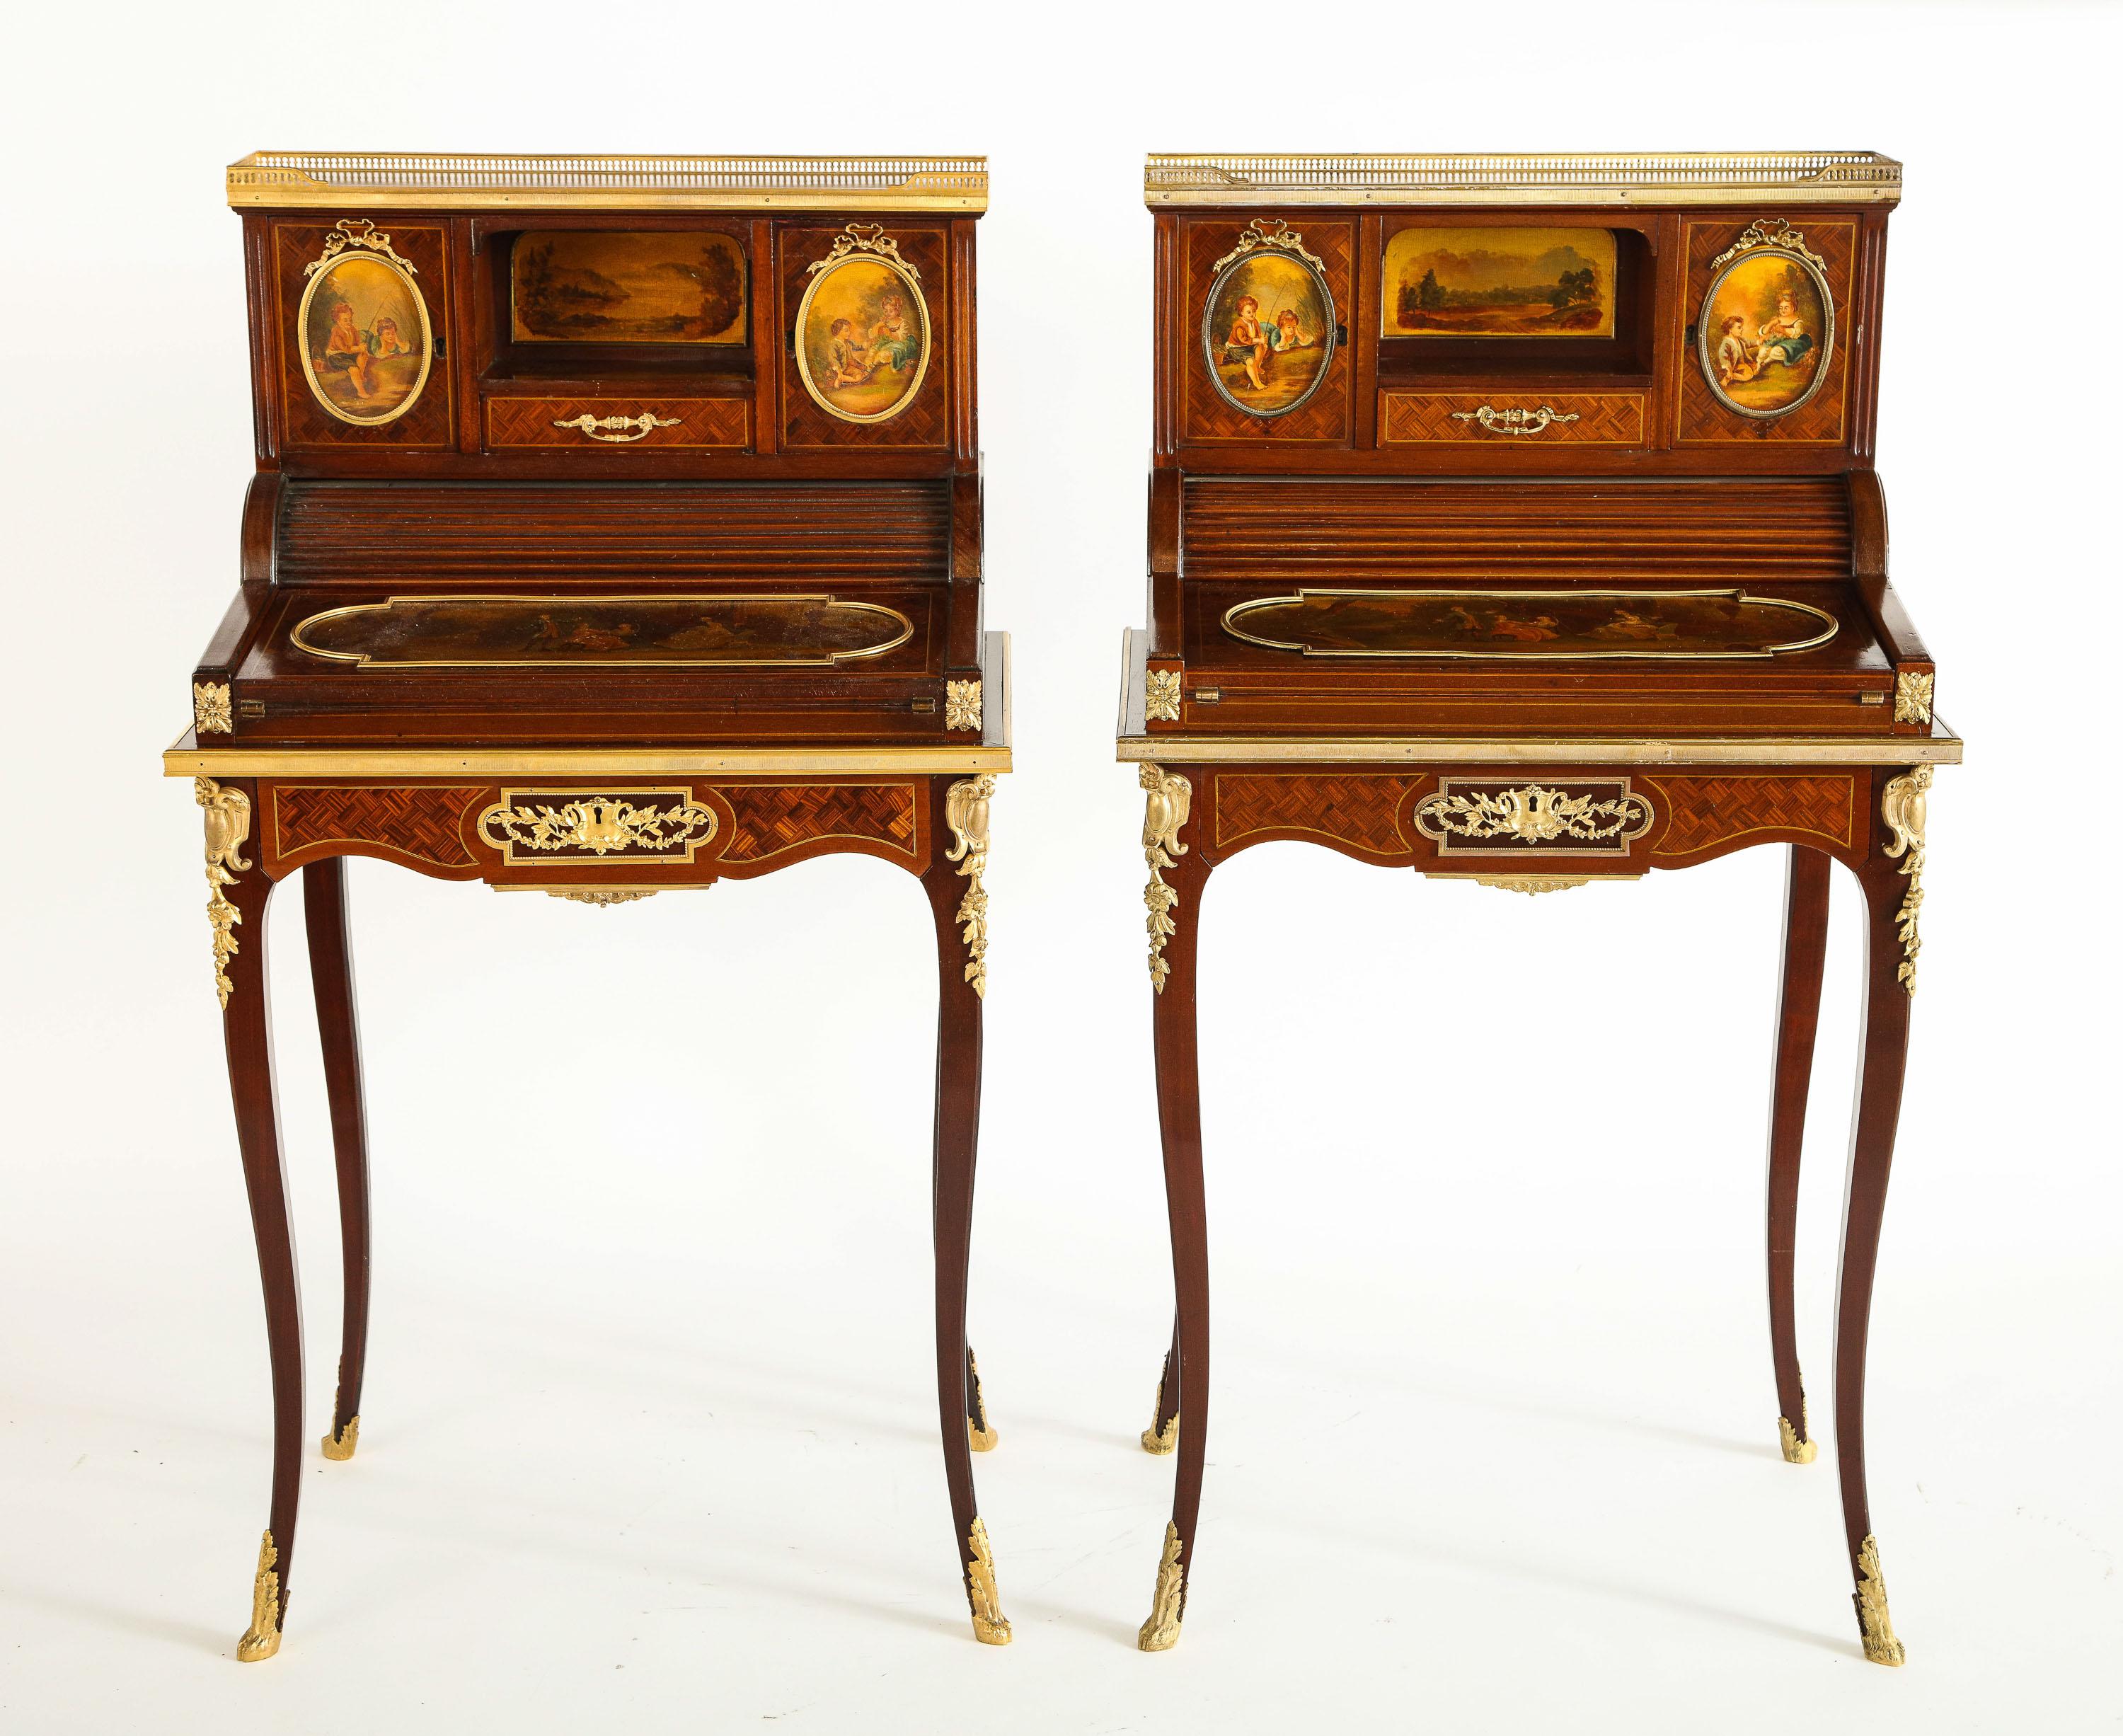 A fabulous pair of Louis XVI style bronze, Vernis Martin, and marquetry Bonheur Du Jours, (Desks, cabinets) by P.E. Guerin N.Y. and retailed by Bailey Banks & Biddle, Philadelphia, circa 1890

Finely mounted with doré bronze mounts, and nice